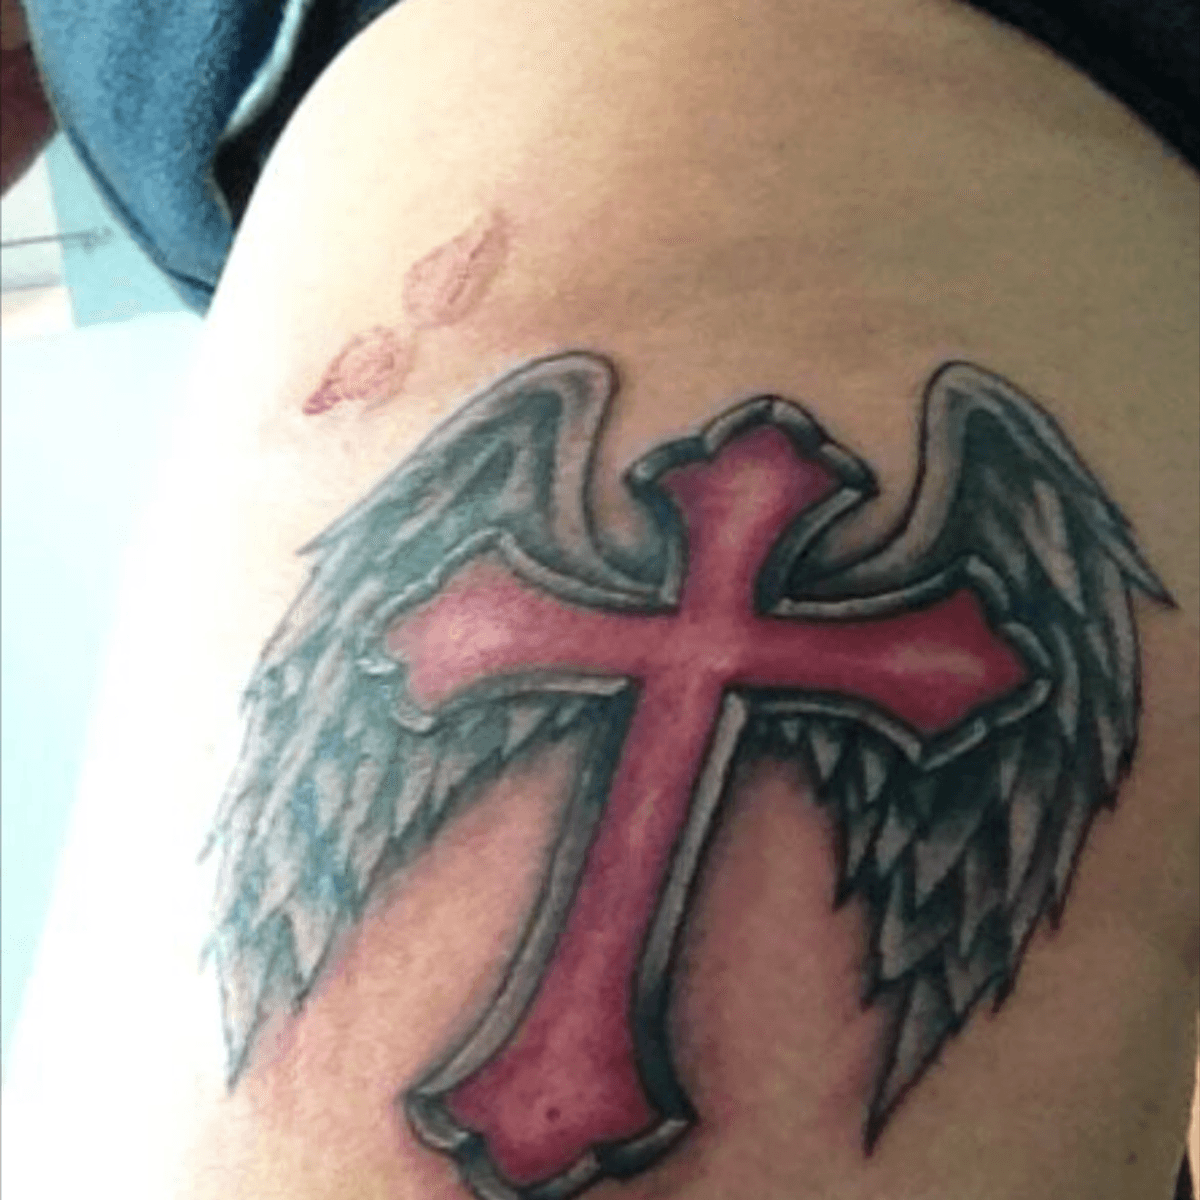 cross with angel wings tattoo designs